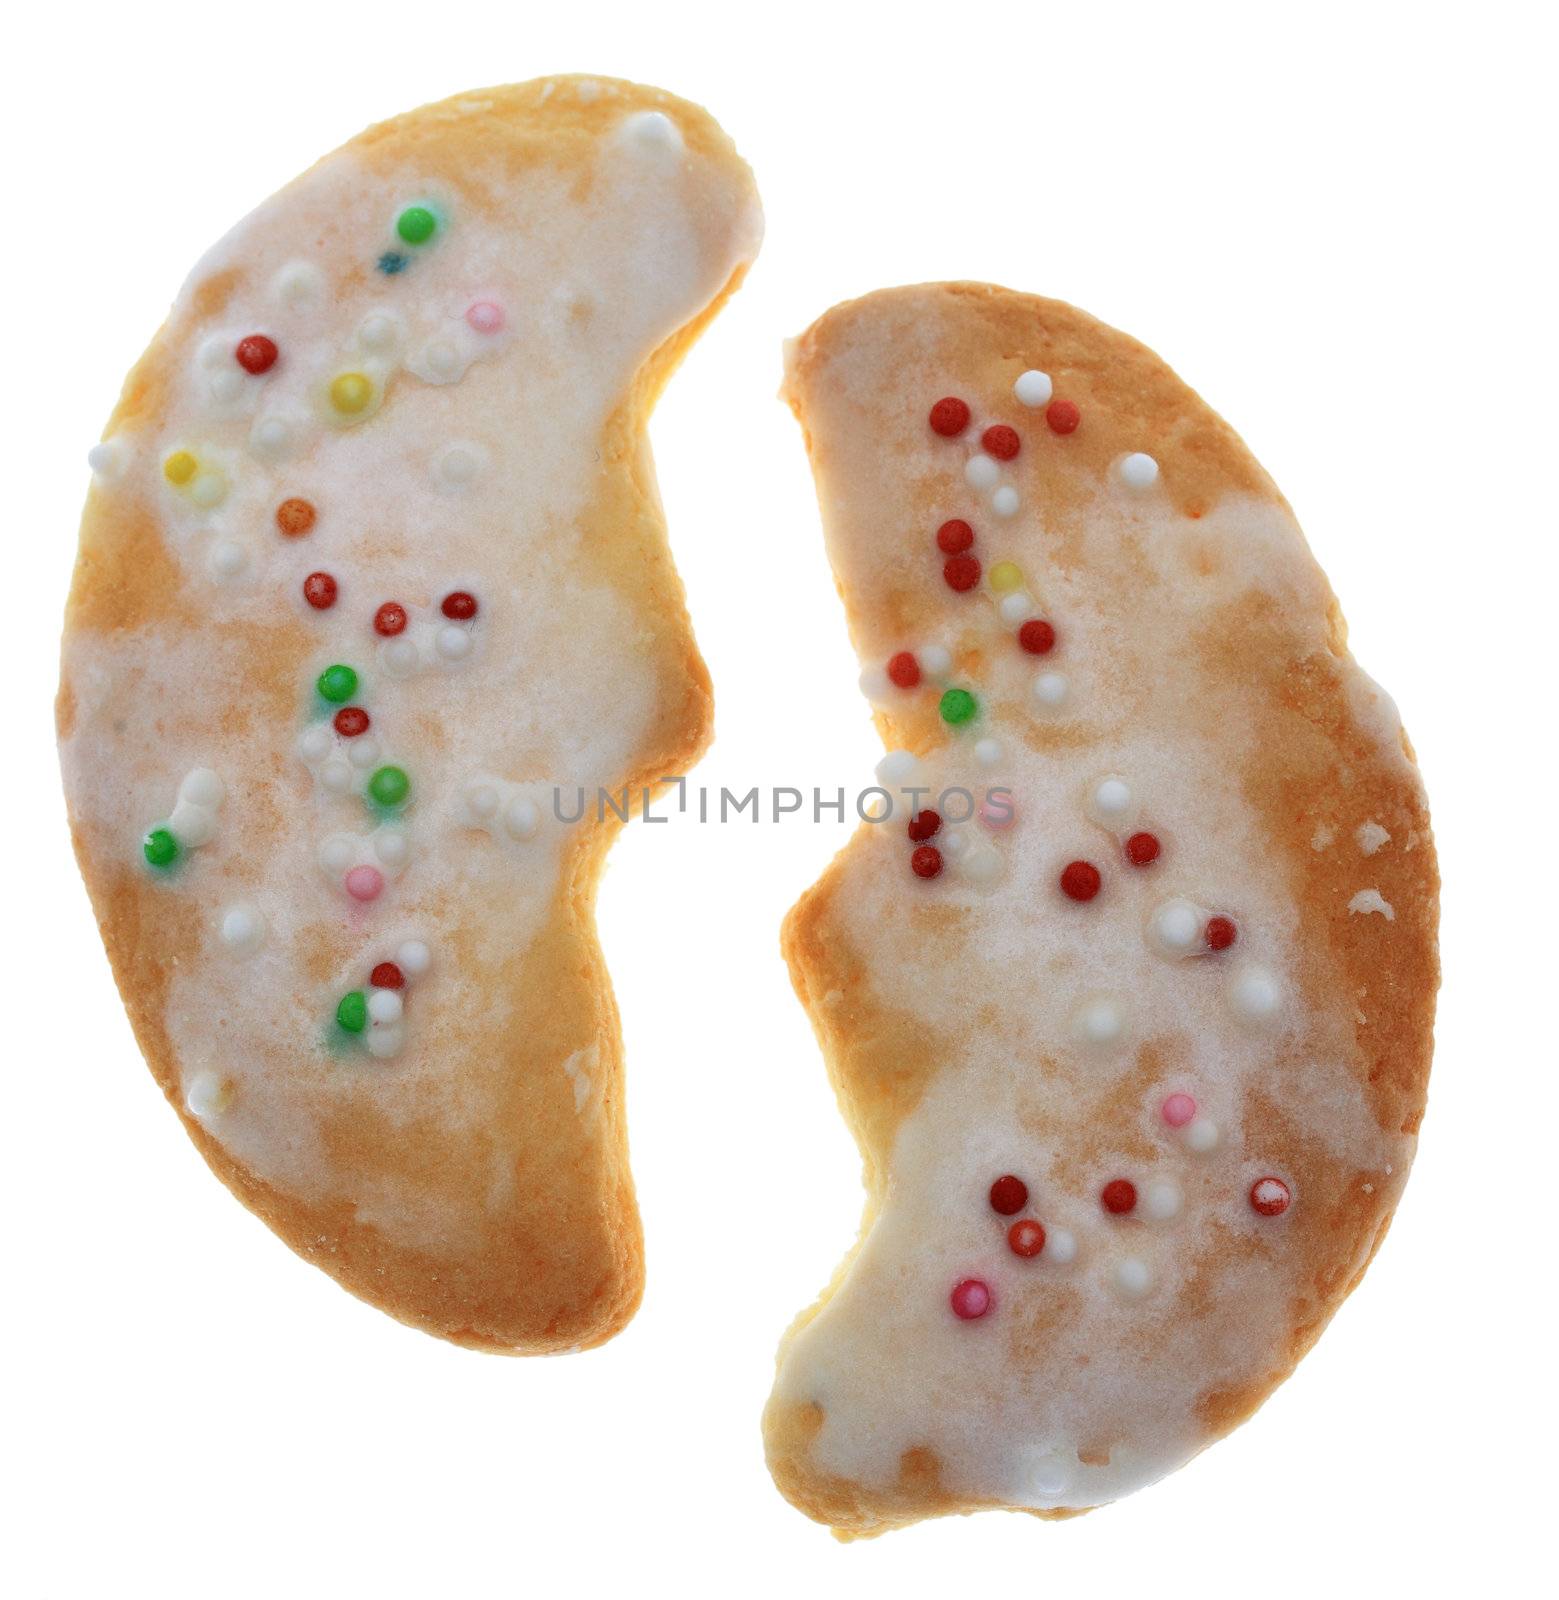 Two traditional moon-shaped cookies isolated against a white background.